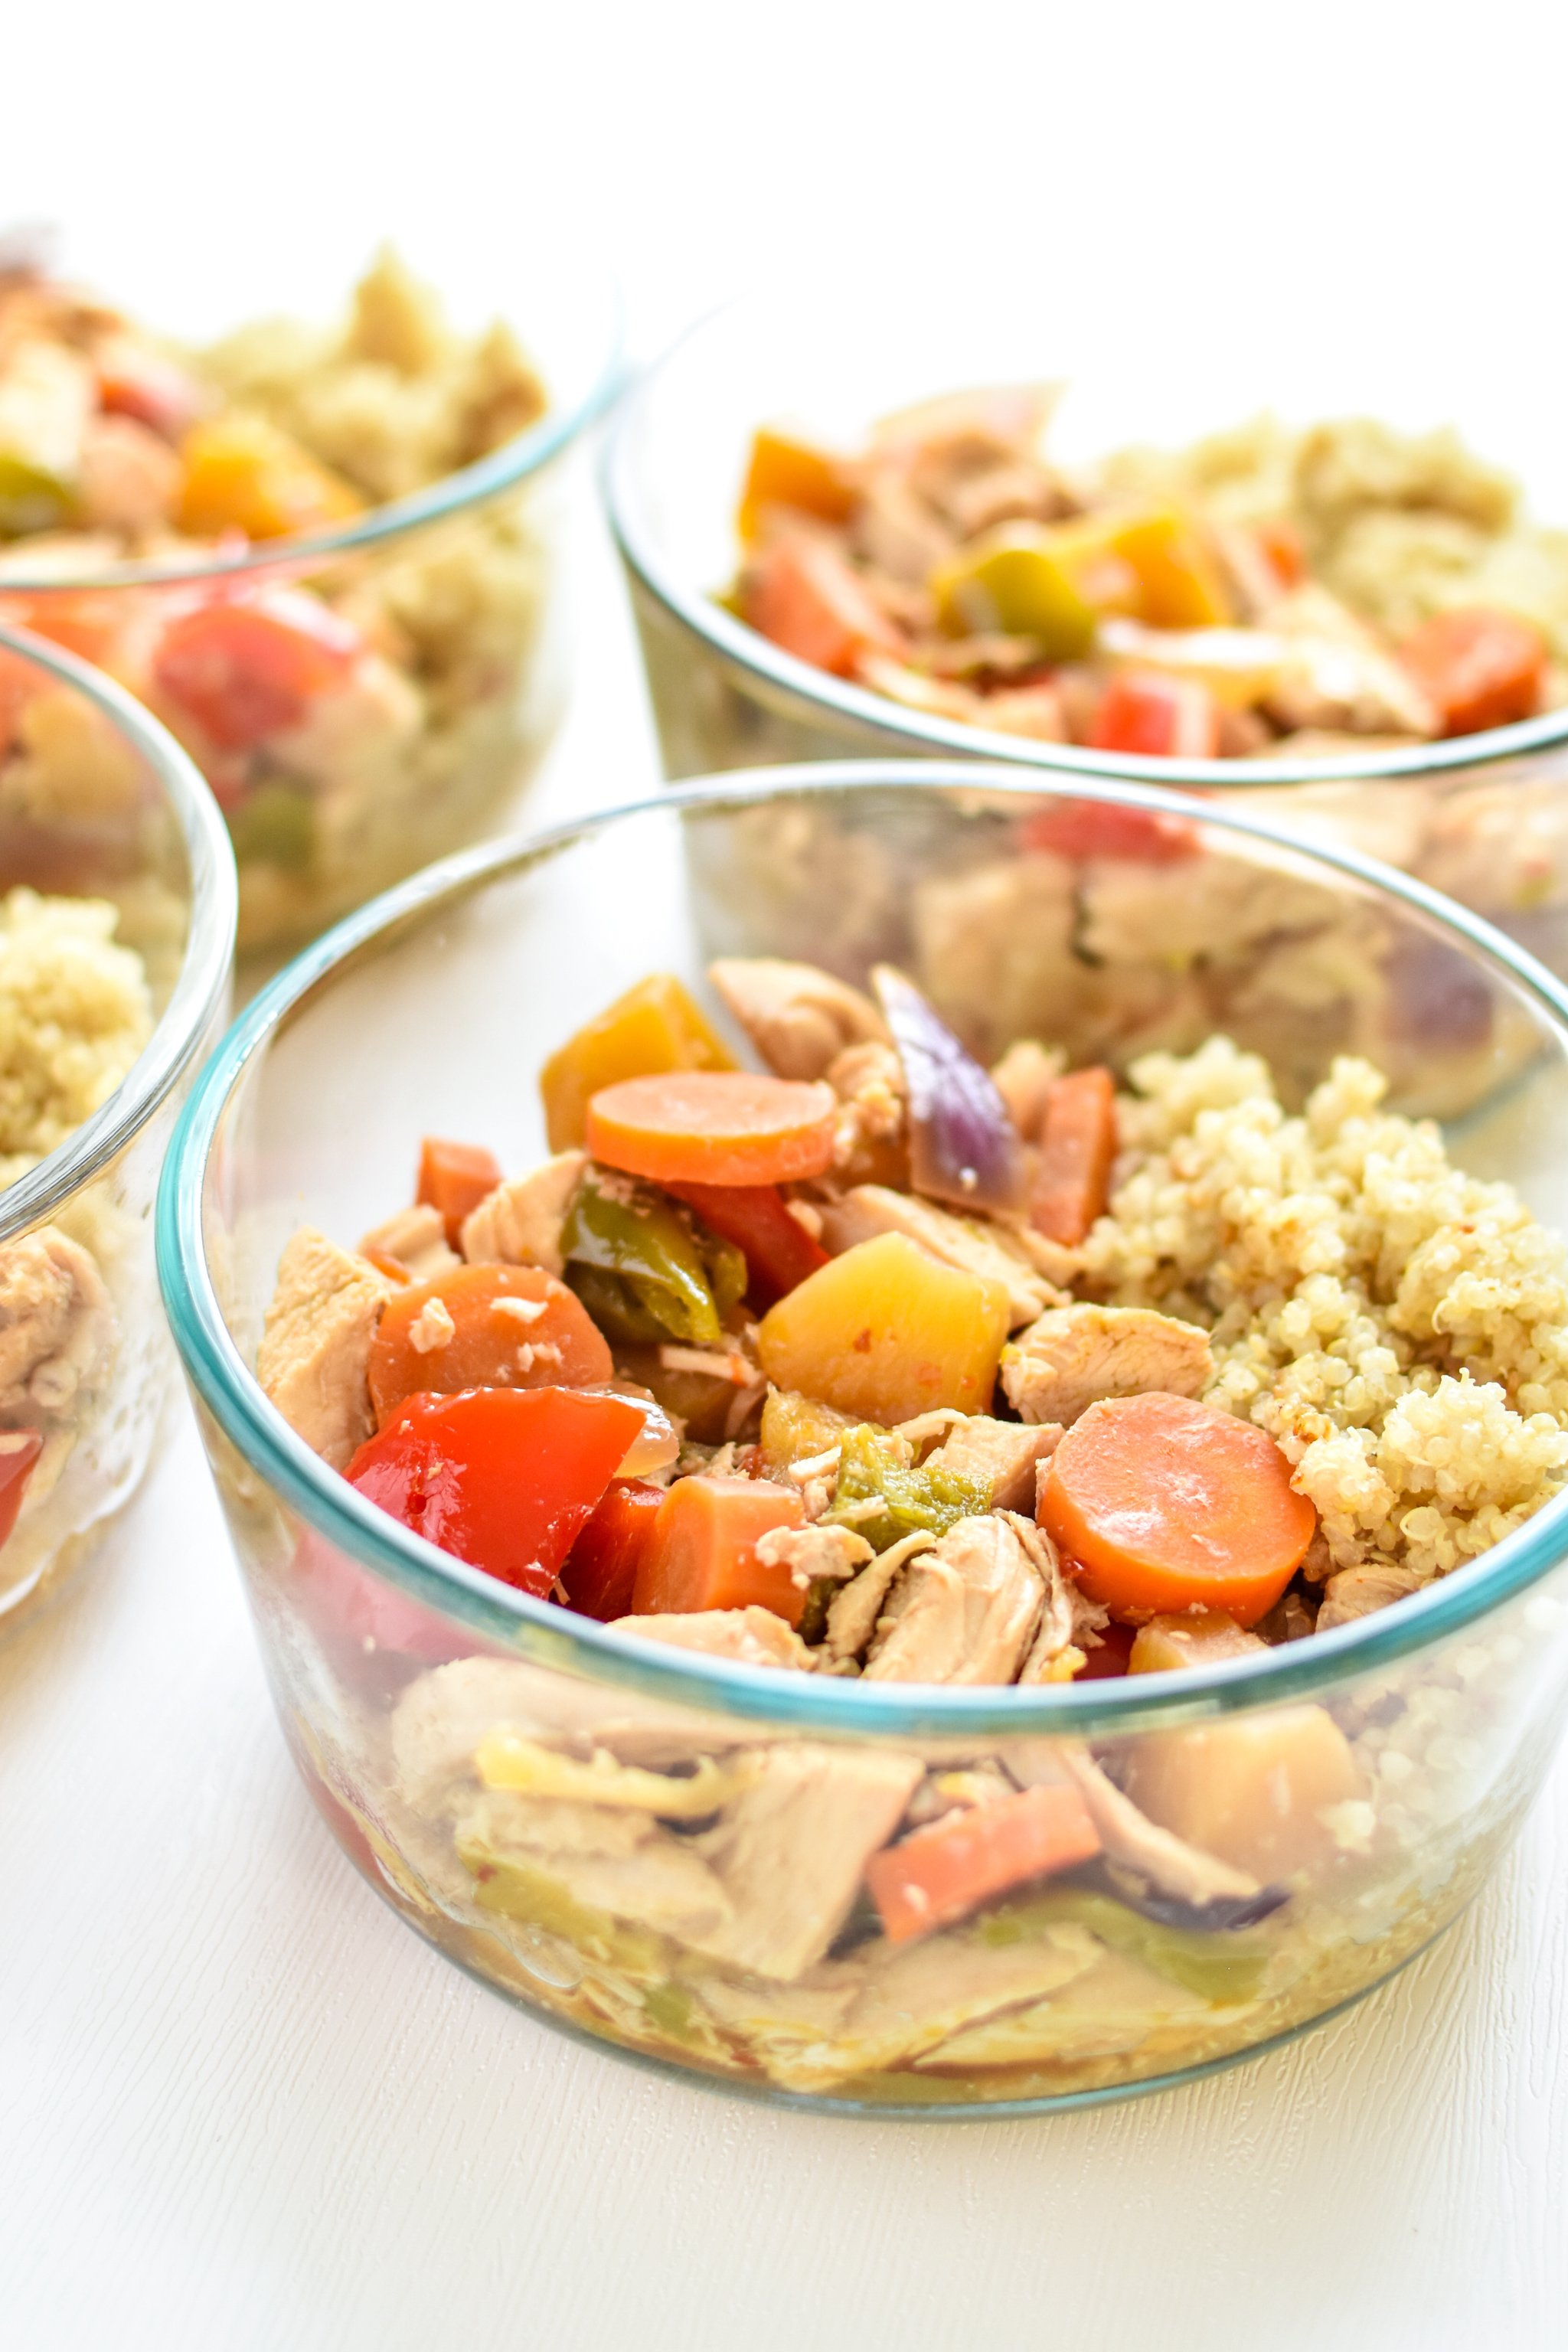 Meal Prep Slow Cooker Chicken Teriyaki Quinoa Bowls - Meal prep a healthy version of a takeout favorite! Four meals ready for the week, with chicken, veggies and quinoa. - ProjectMealPlan.com